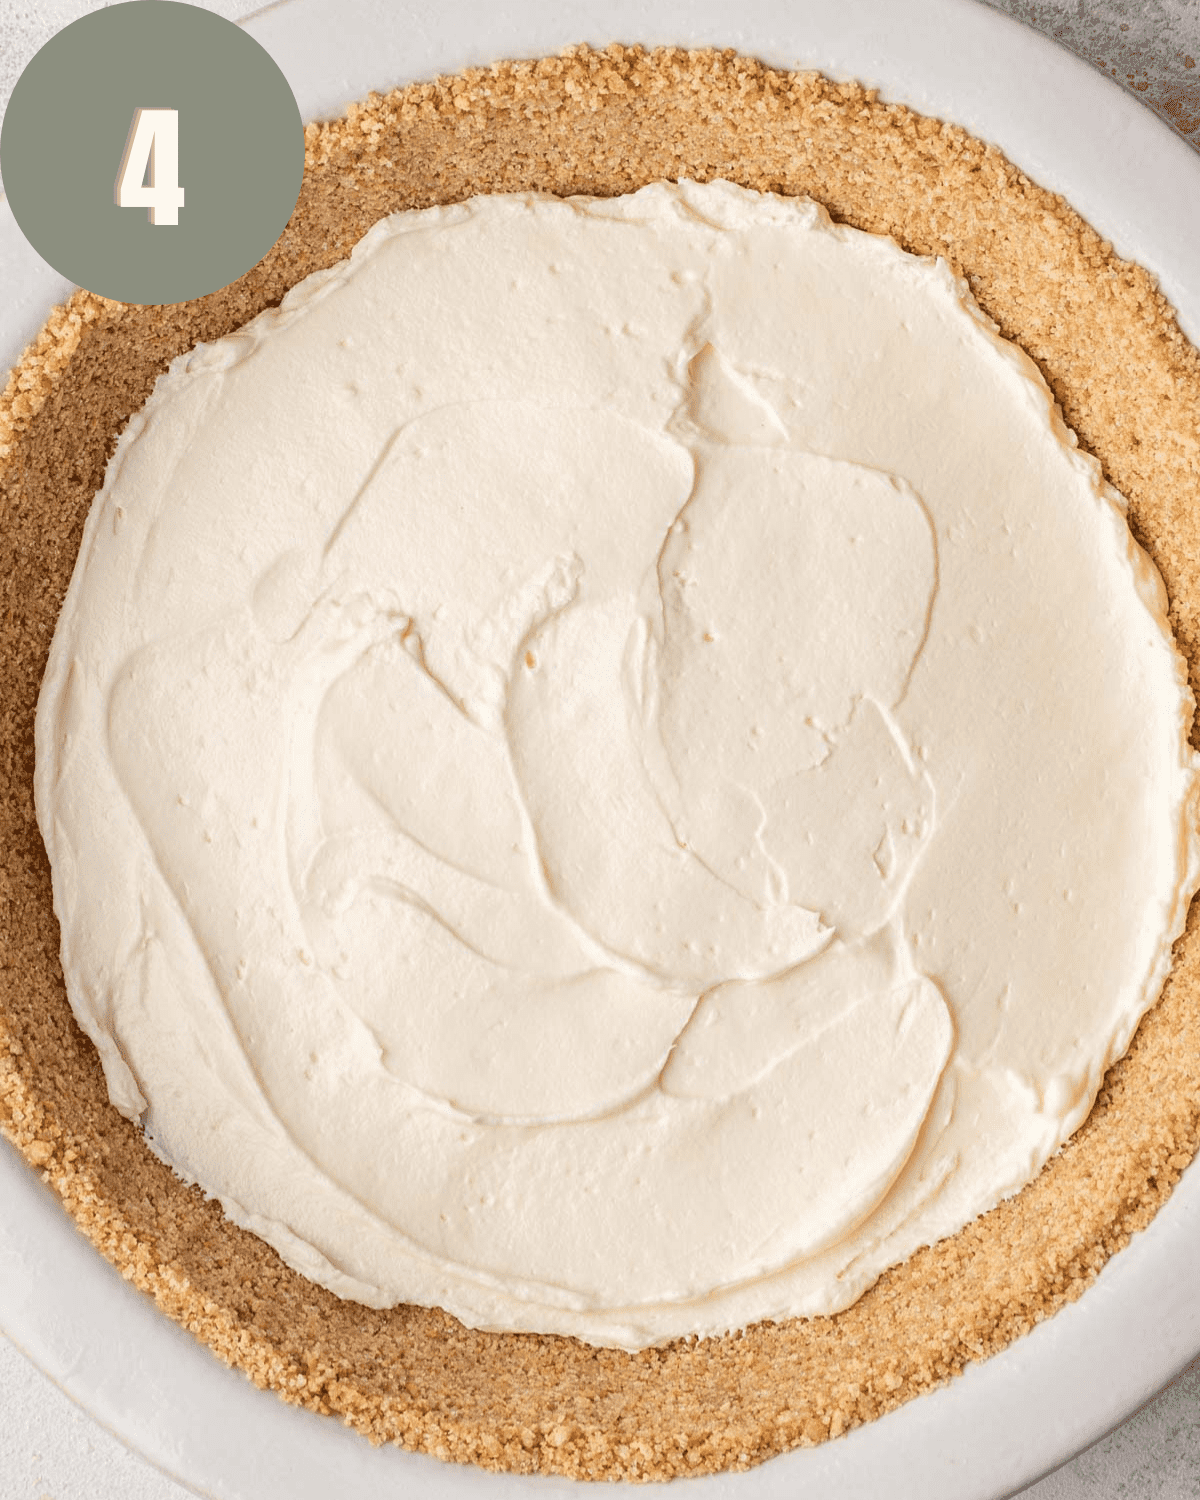 cream cheese mixture spread into the bottom of a graham cracker crust